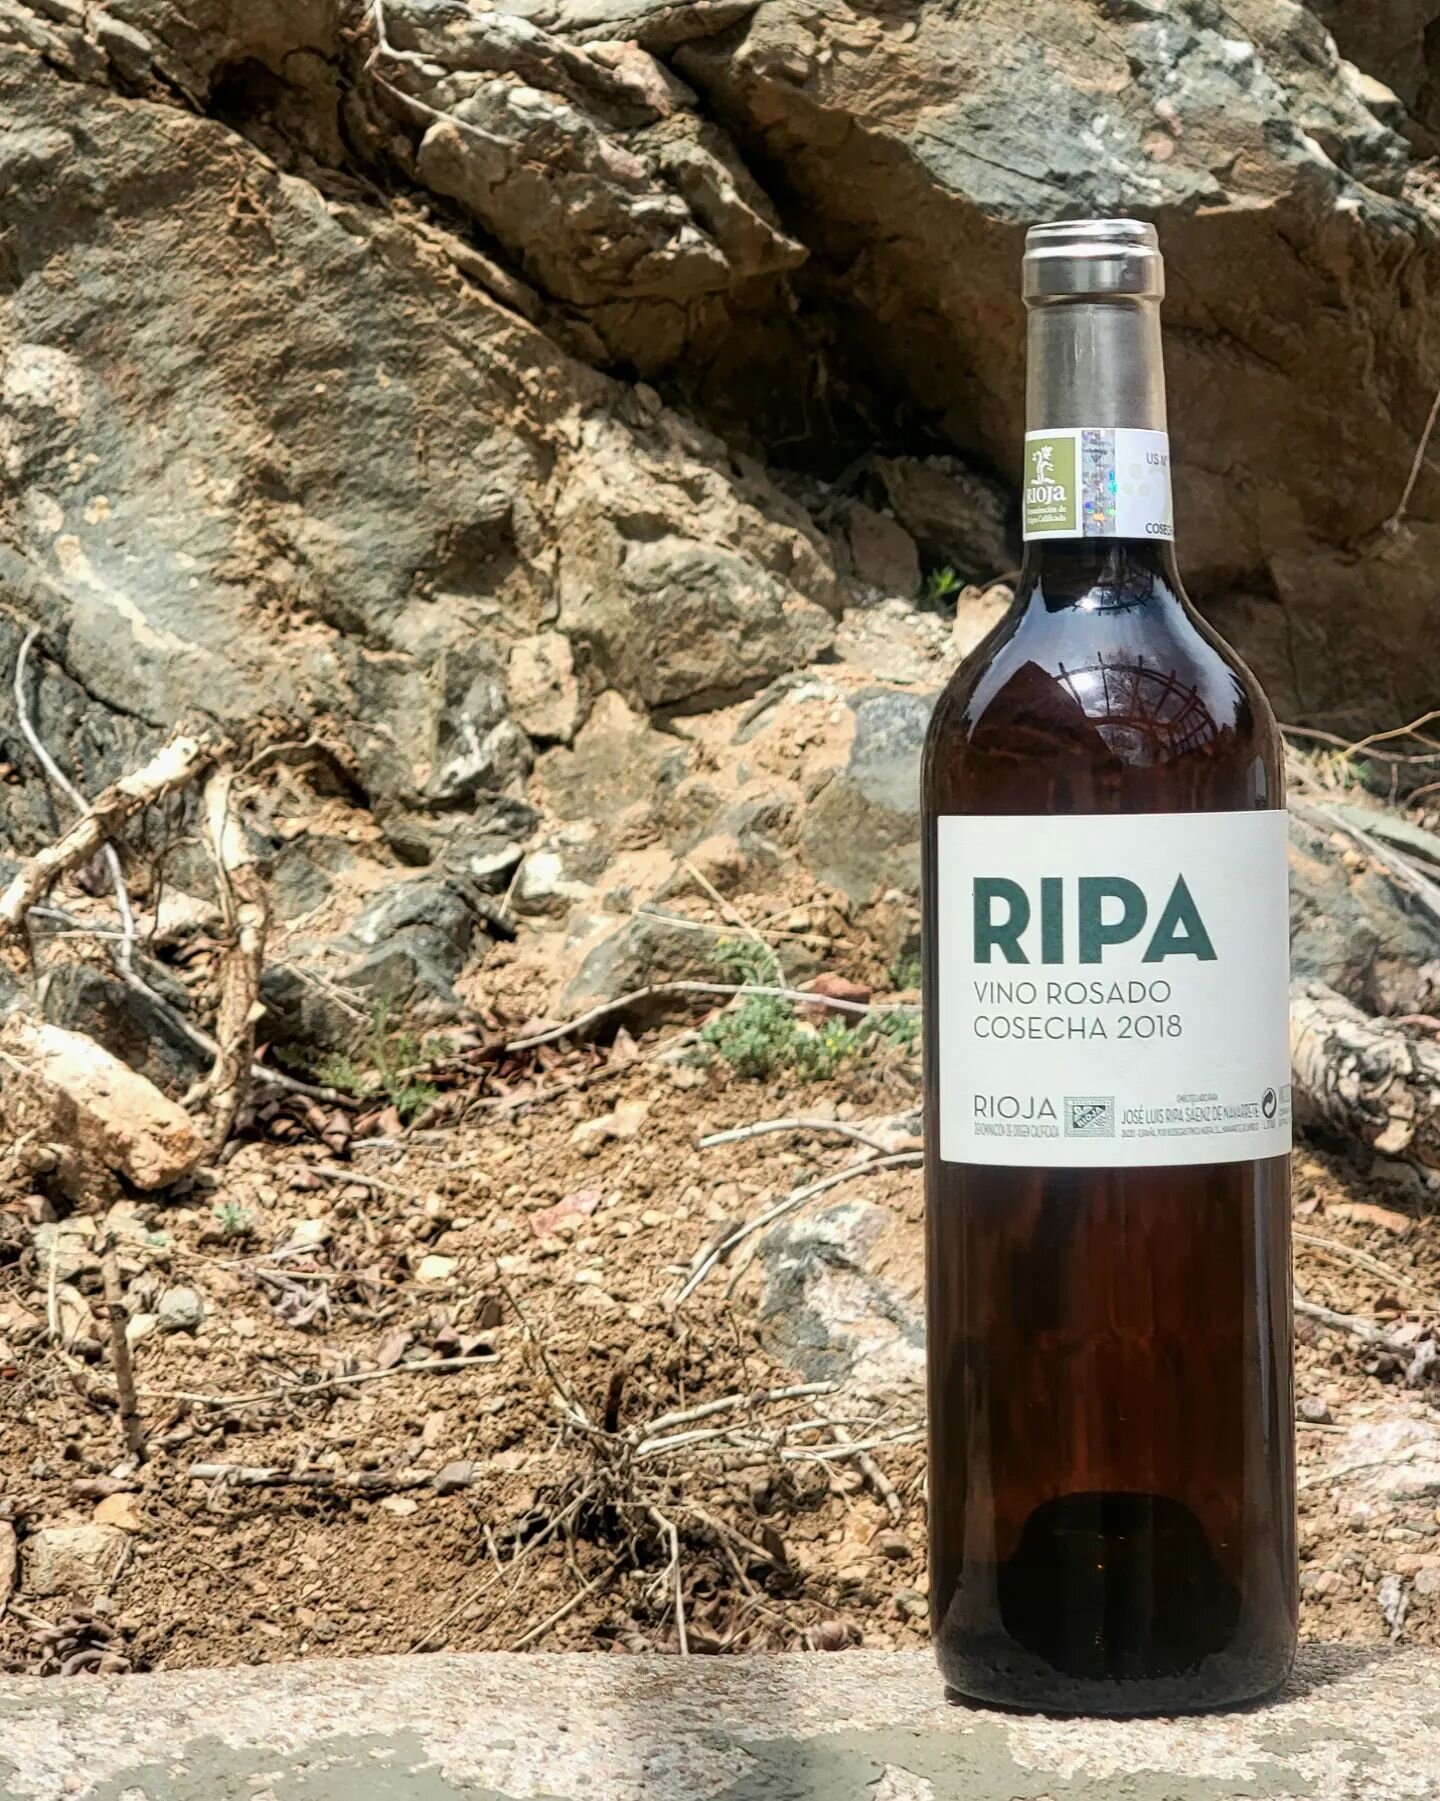 💥It's an exciting day at Piney!💥
___________________________

Jos&eacute; Luis' Ripa Rioja Vino Rosado is
a crowning achievement in Ros&eacute;
winemaking. From placement in
stainless steel vats, a bleeding
process, and fermentation in French
oak c